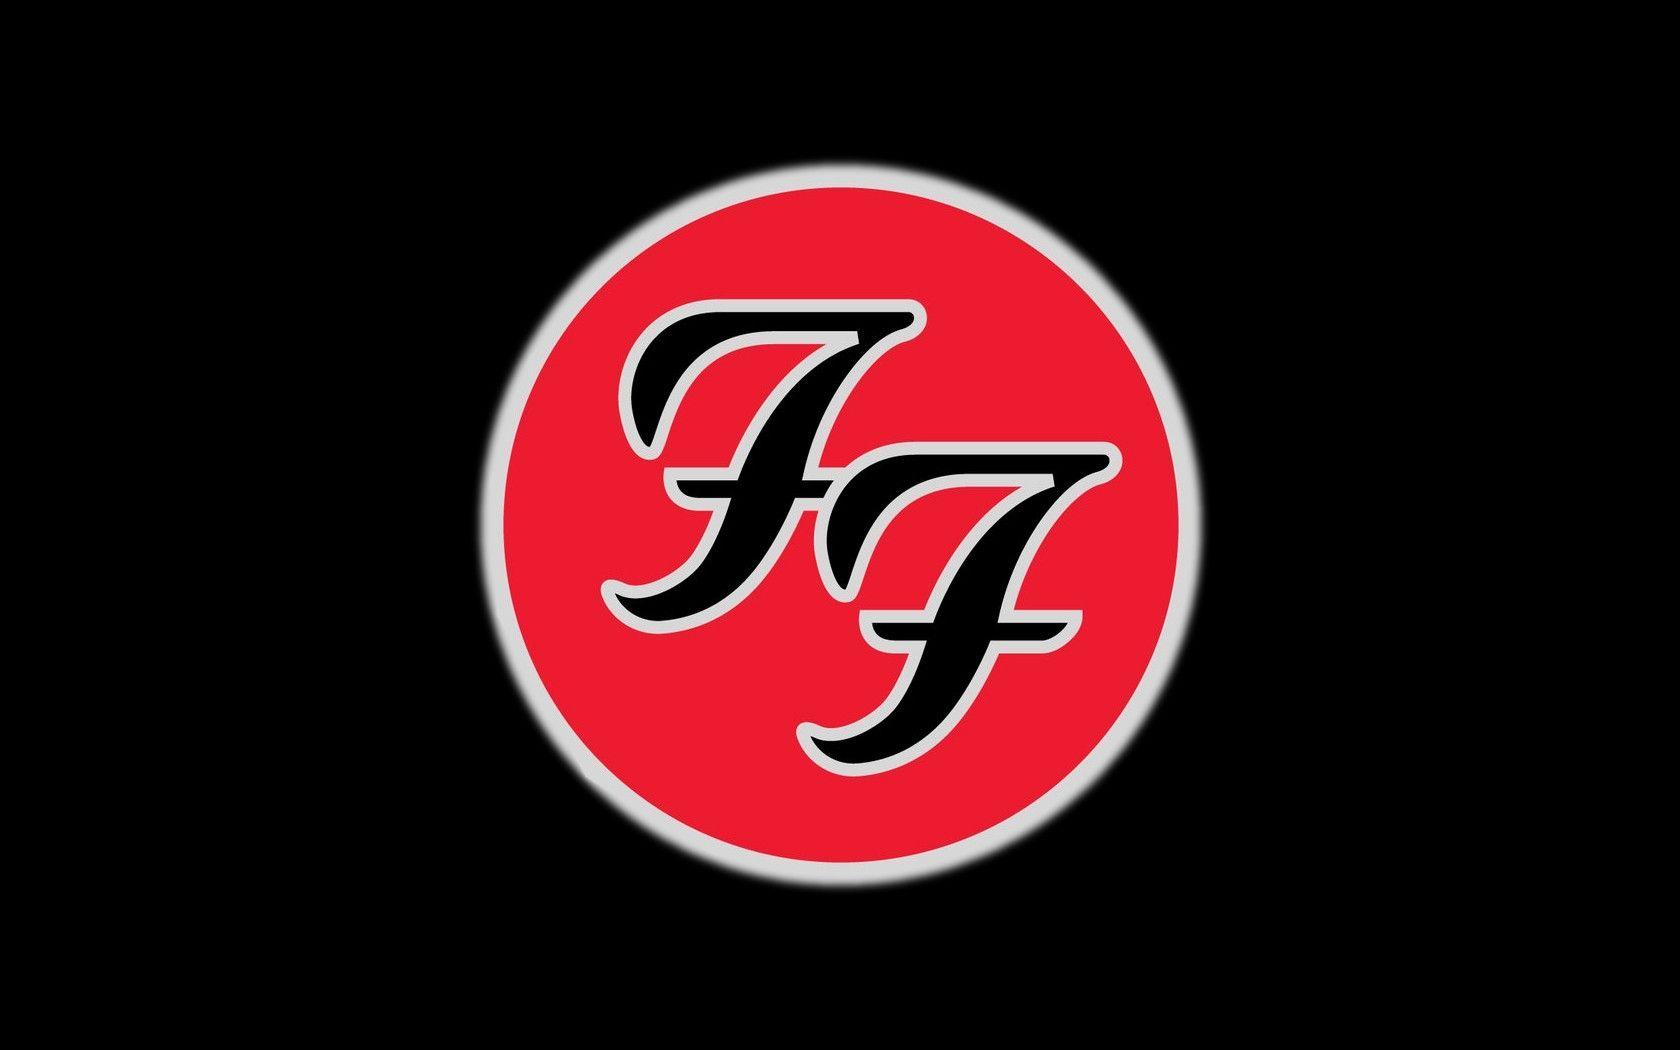 Foo Fighters Logo - Wallpaper : red, text, logo, sign, circle, brand, Foo Fighters, icon